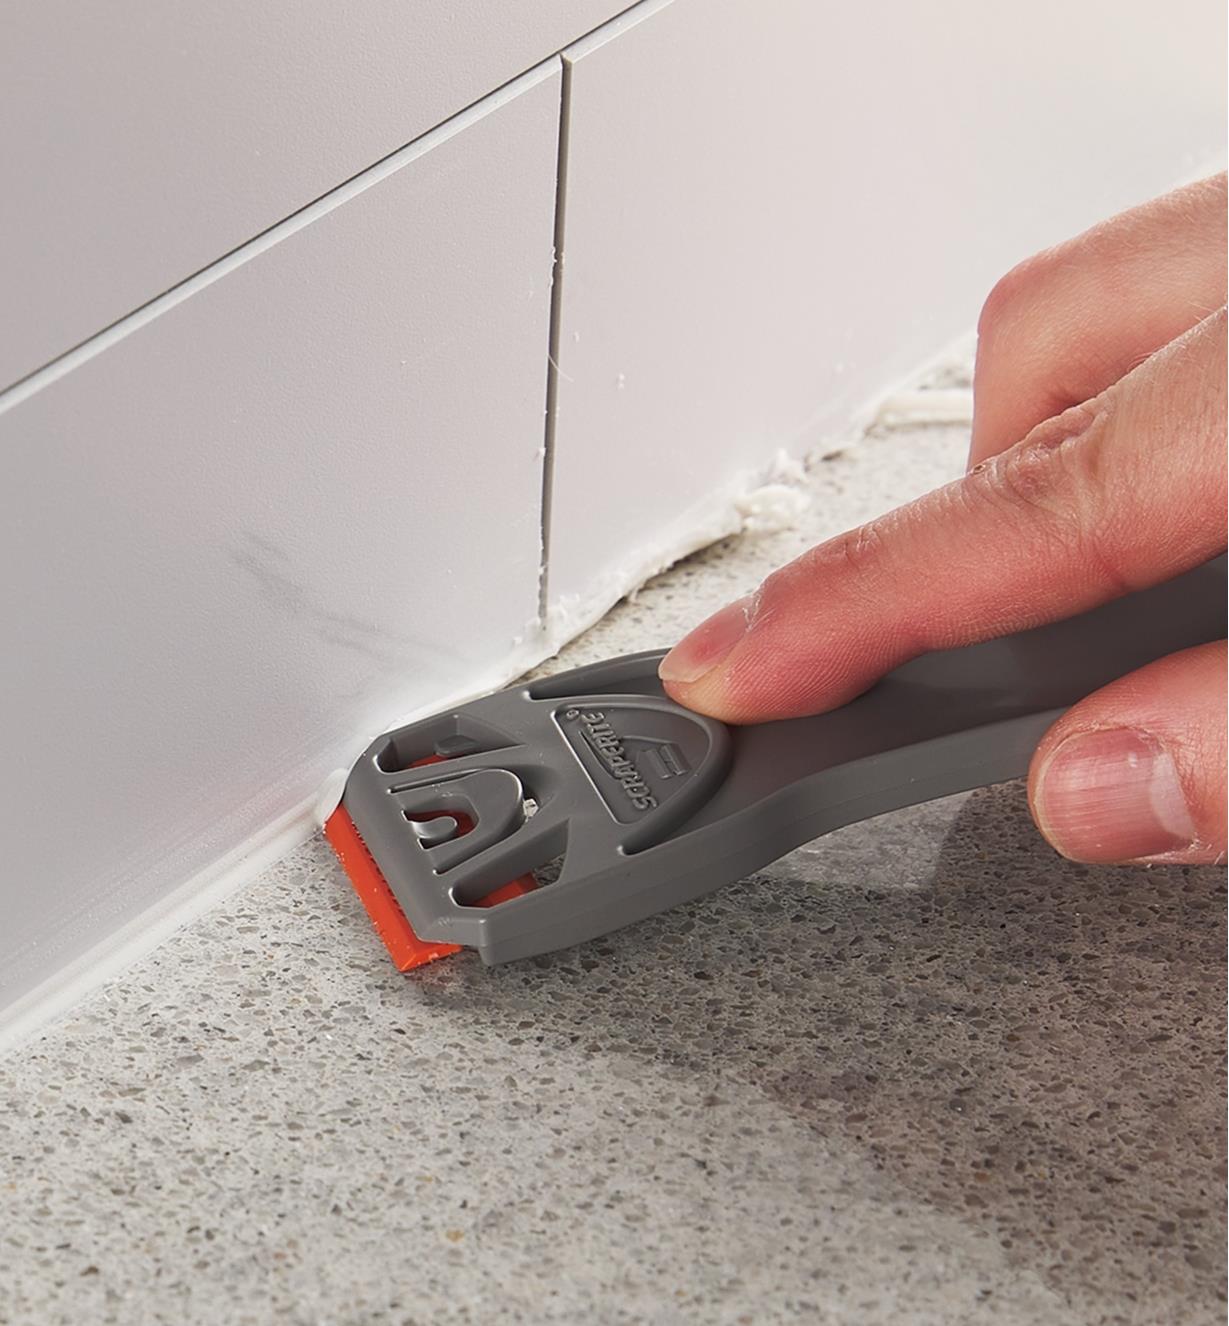 Scraping grout using a razor blade in a holder